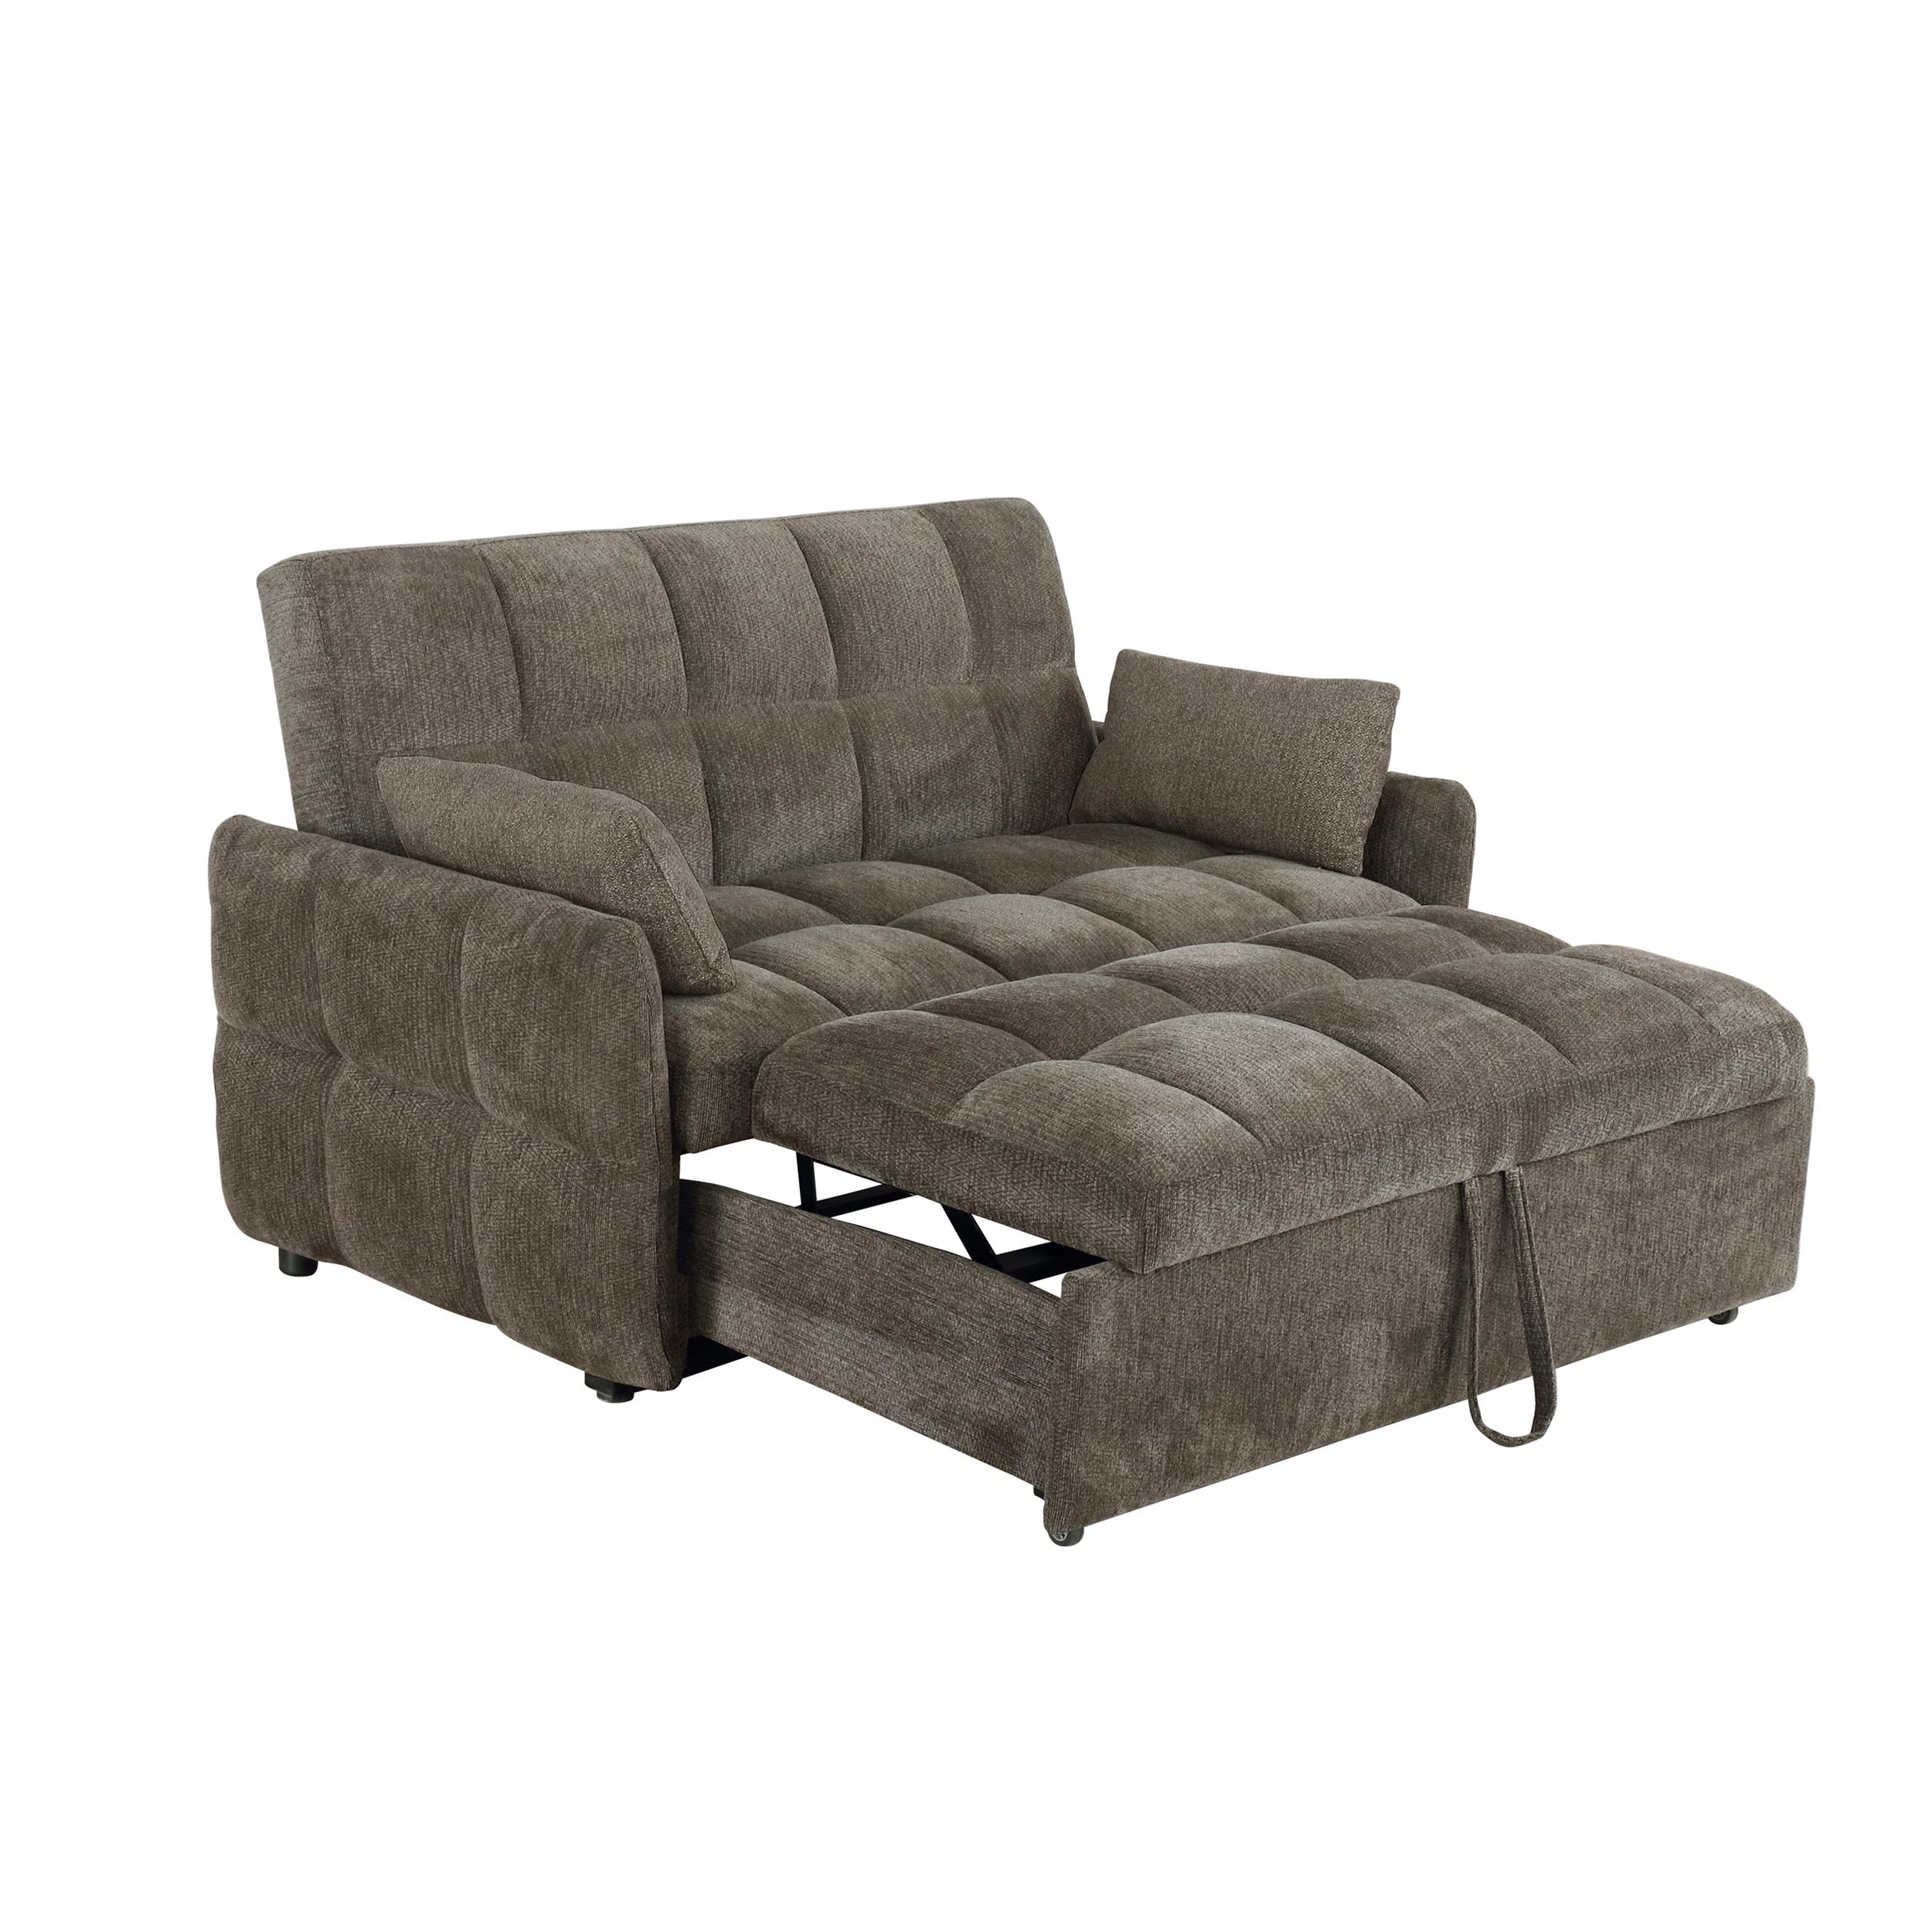 Transitional Sleeper Sofa Bed 508308 Cotswold 508308 in Brown Chenille